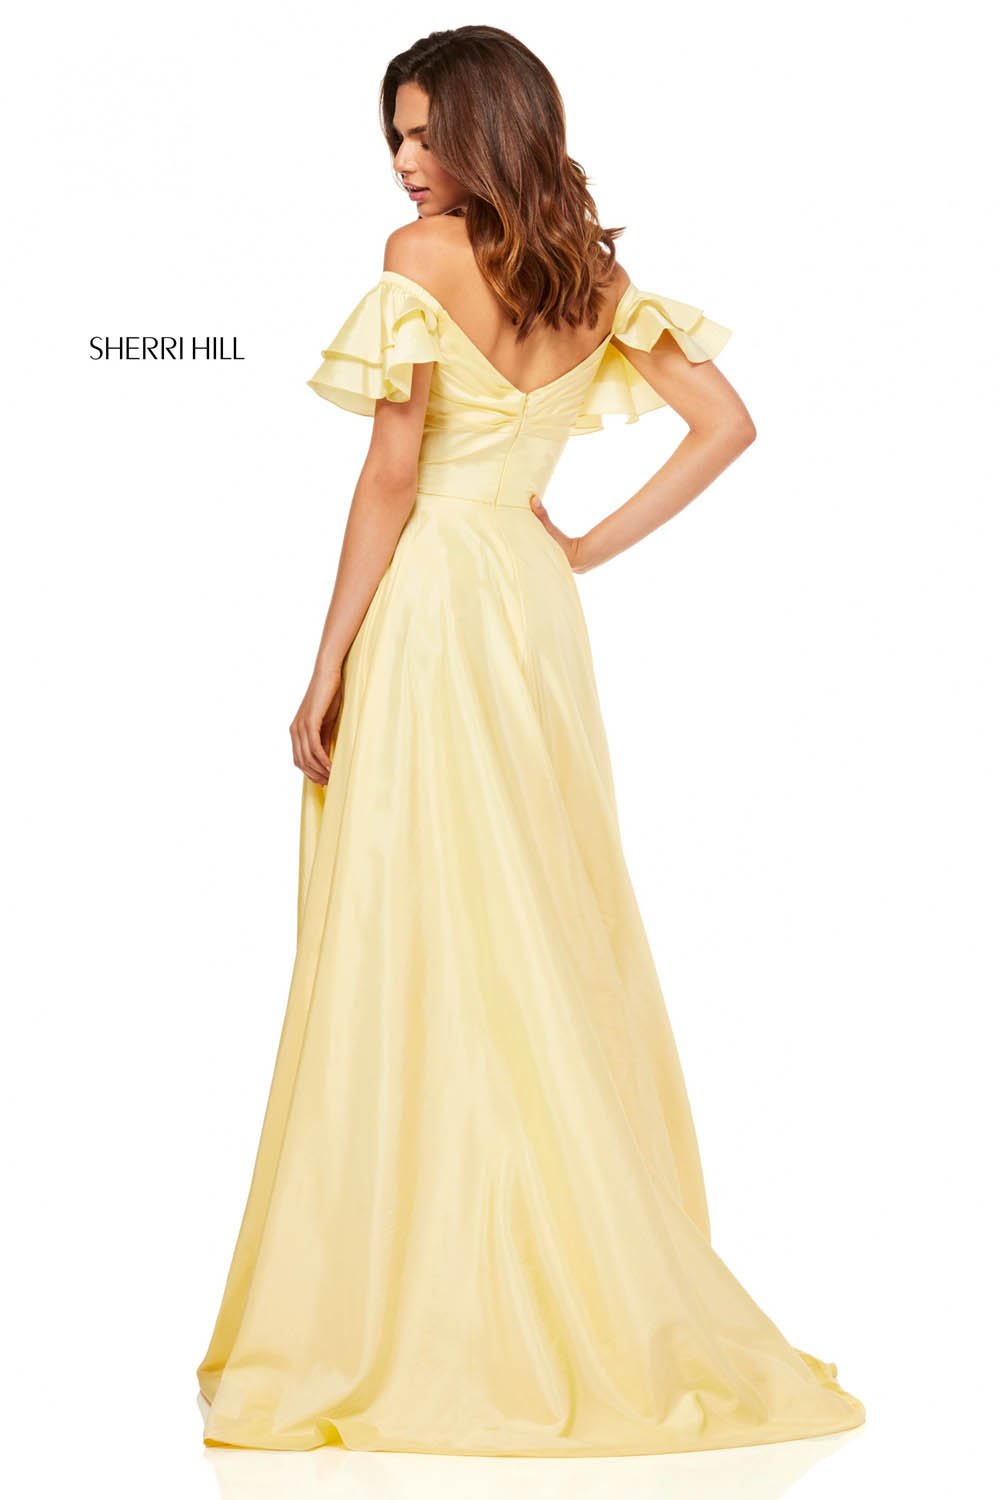 Sherri Hill 52469 dress images in these colors: Yellow, Emerald, Pink, Lilac, Red.